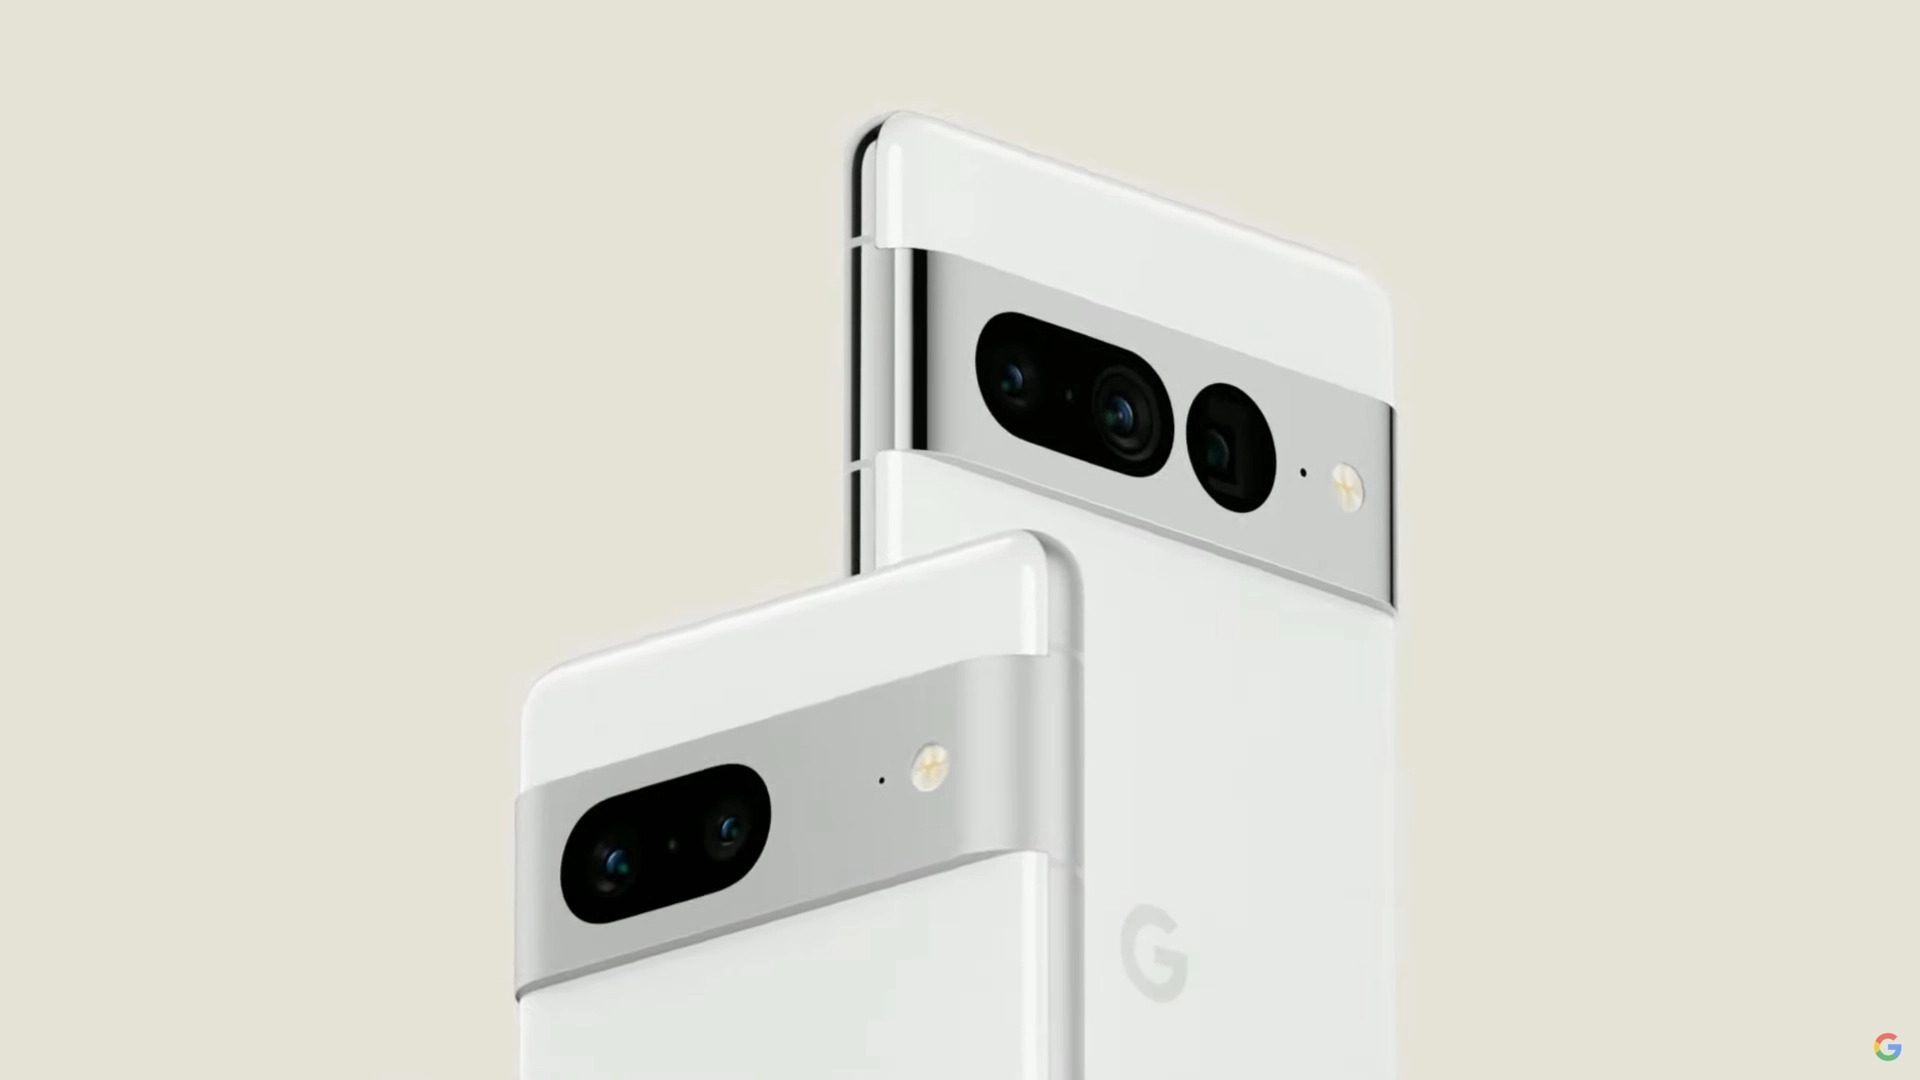 Pixel 7/7 Pro will offer Dual eSIM and Face Unlock

